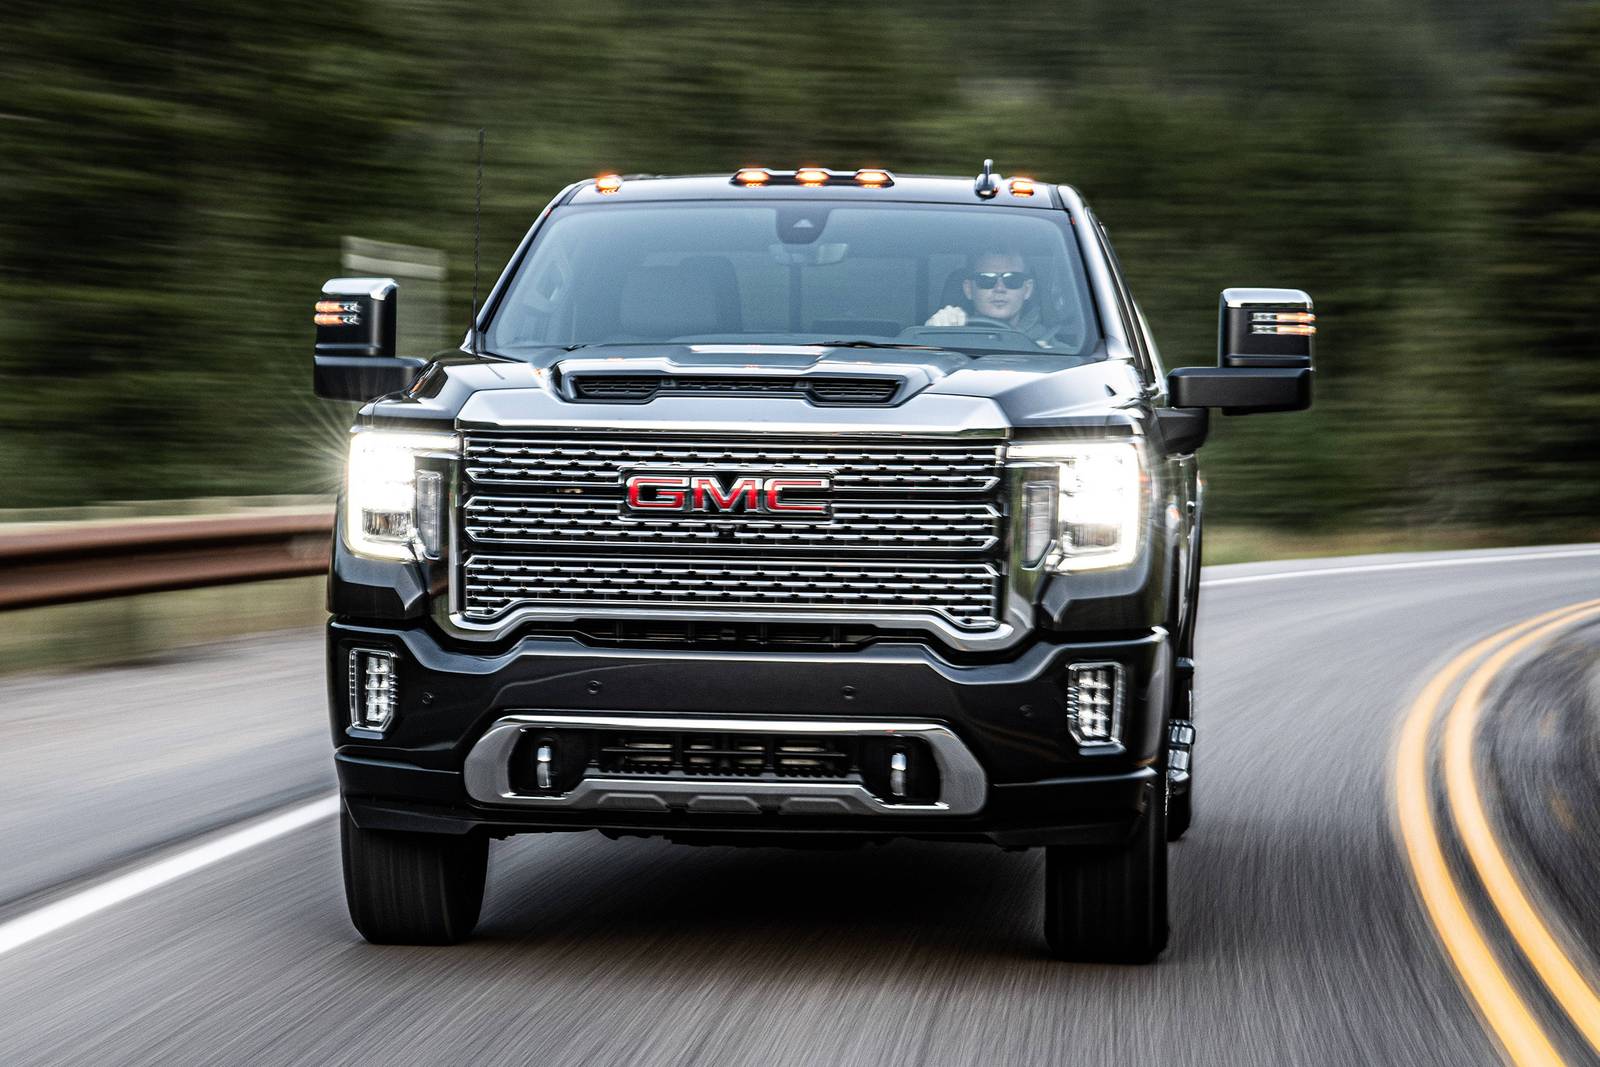 2022 GMC Sierra 2500HD Double Cab Prices, Reviews, and Pictures | Edmunds